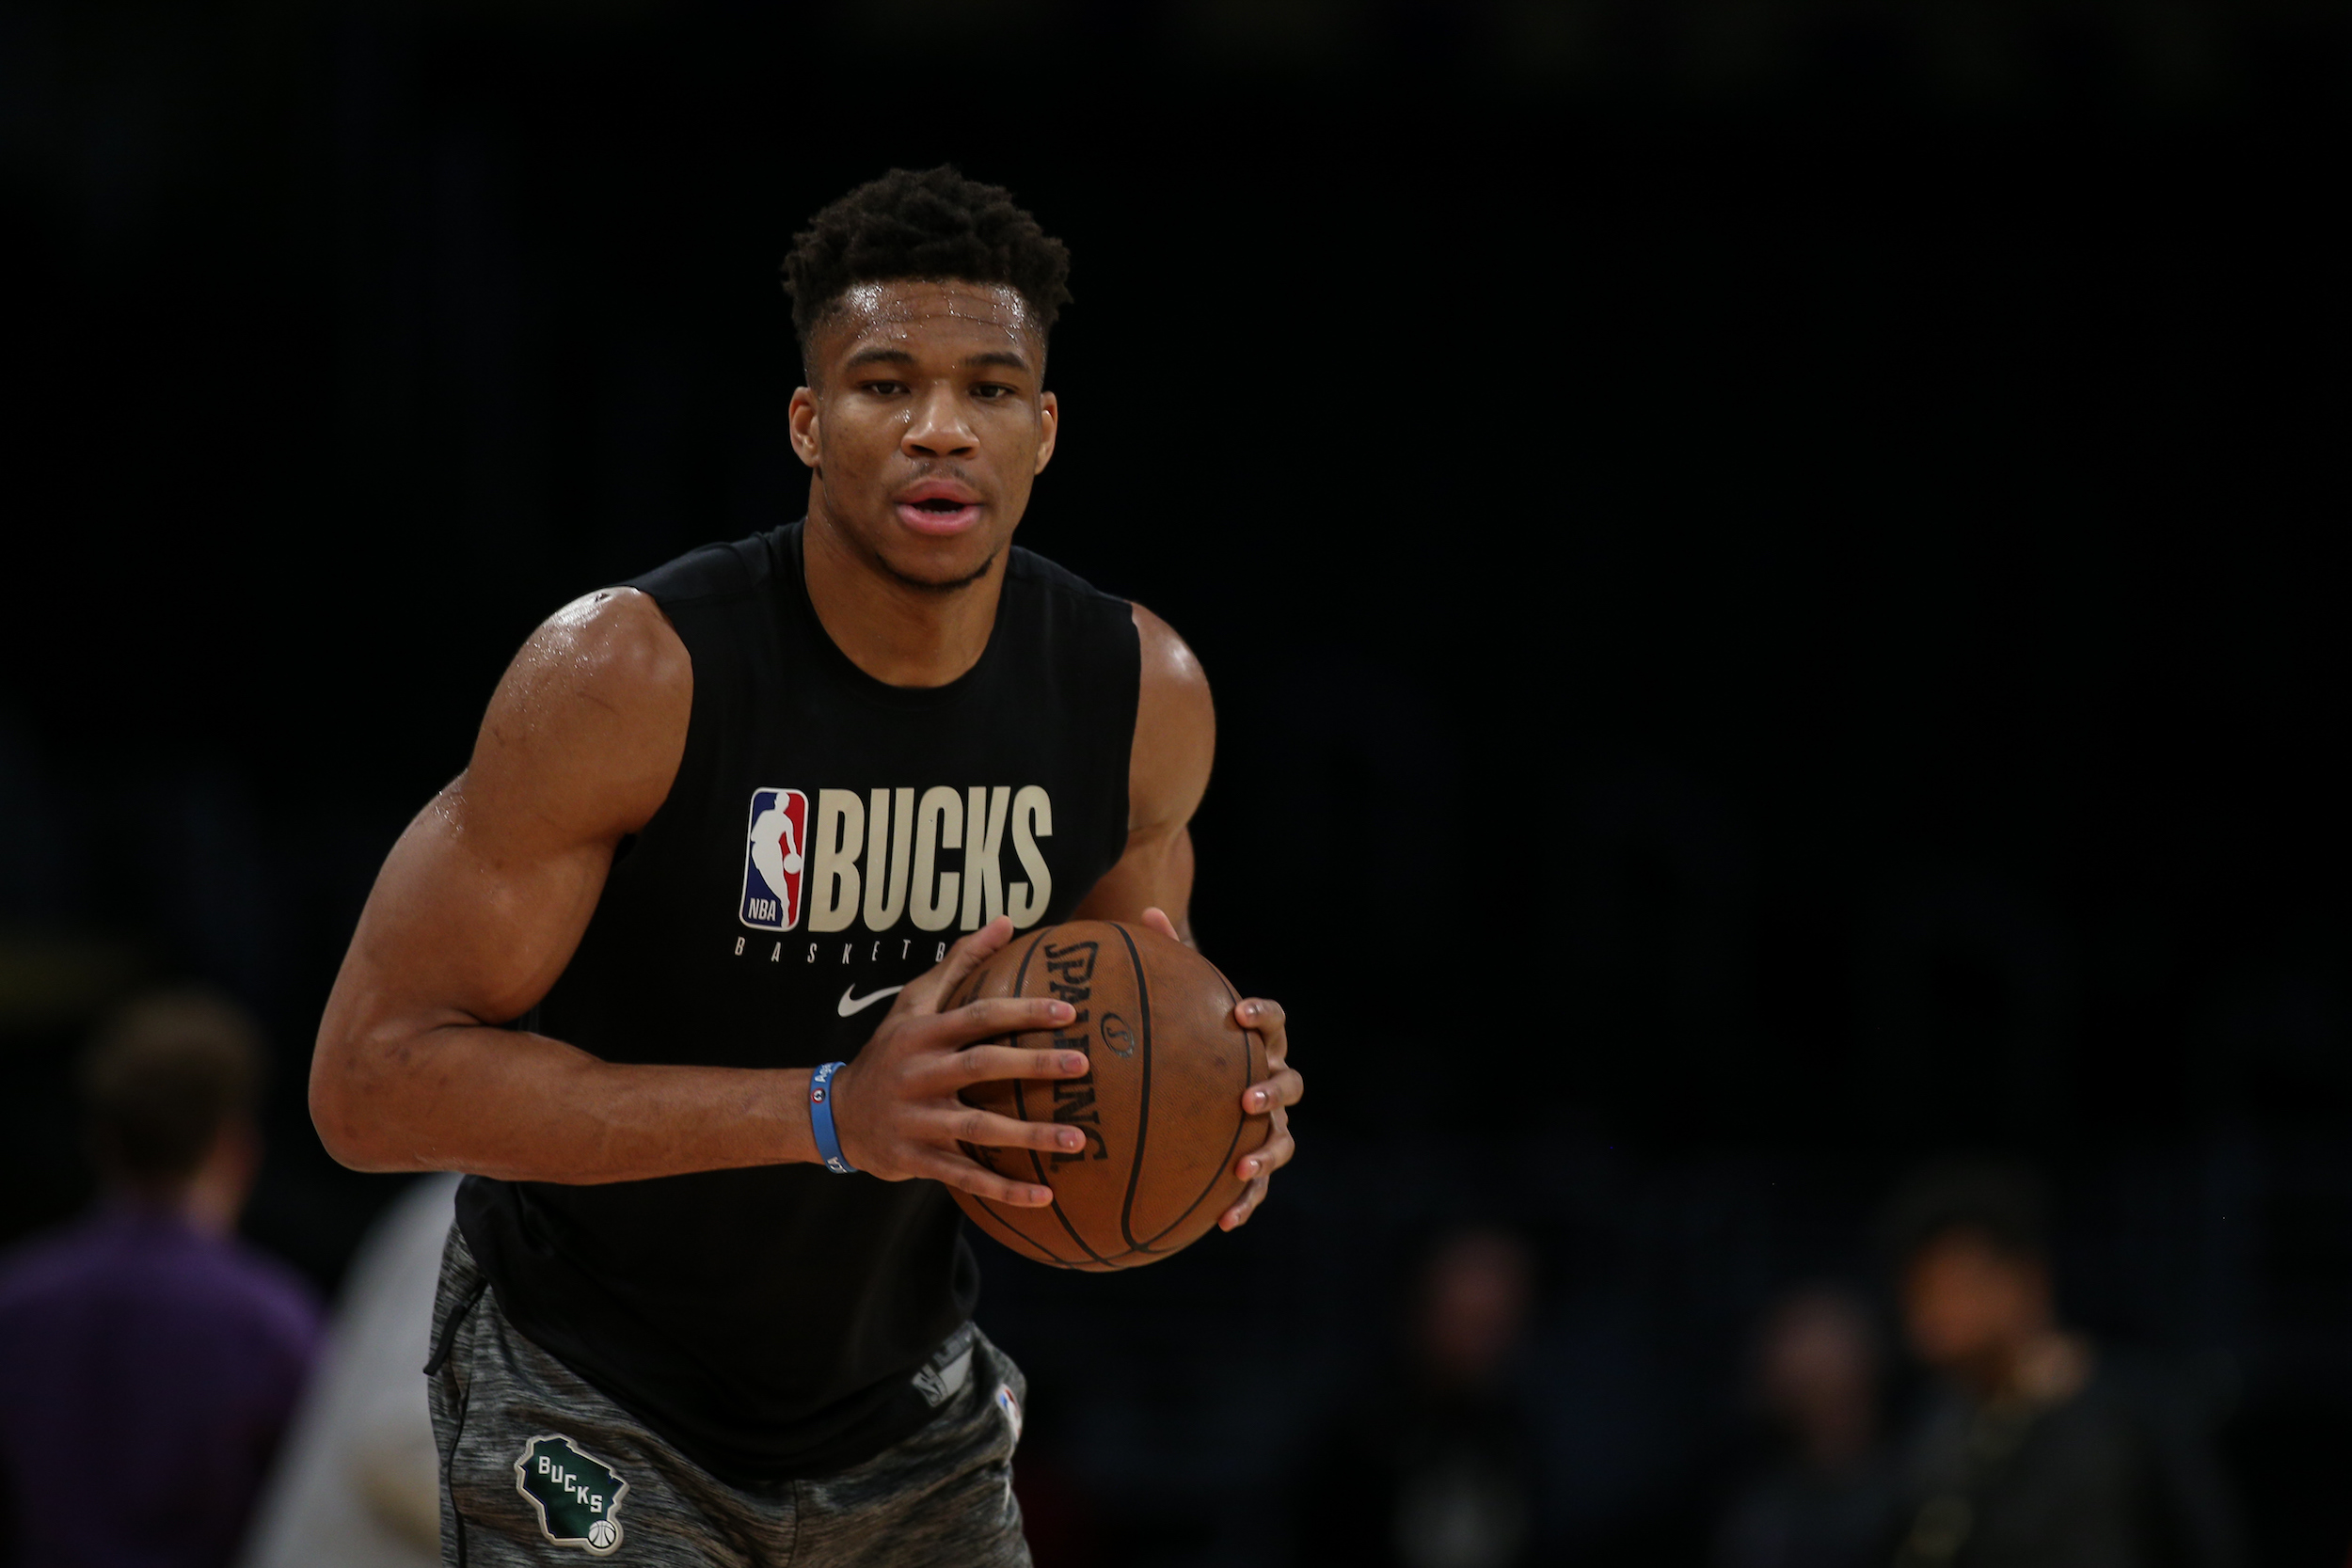 After his childhood in Greece, Giannis Antetokounmpo isn't going to complain about the NBA bubble.